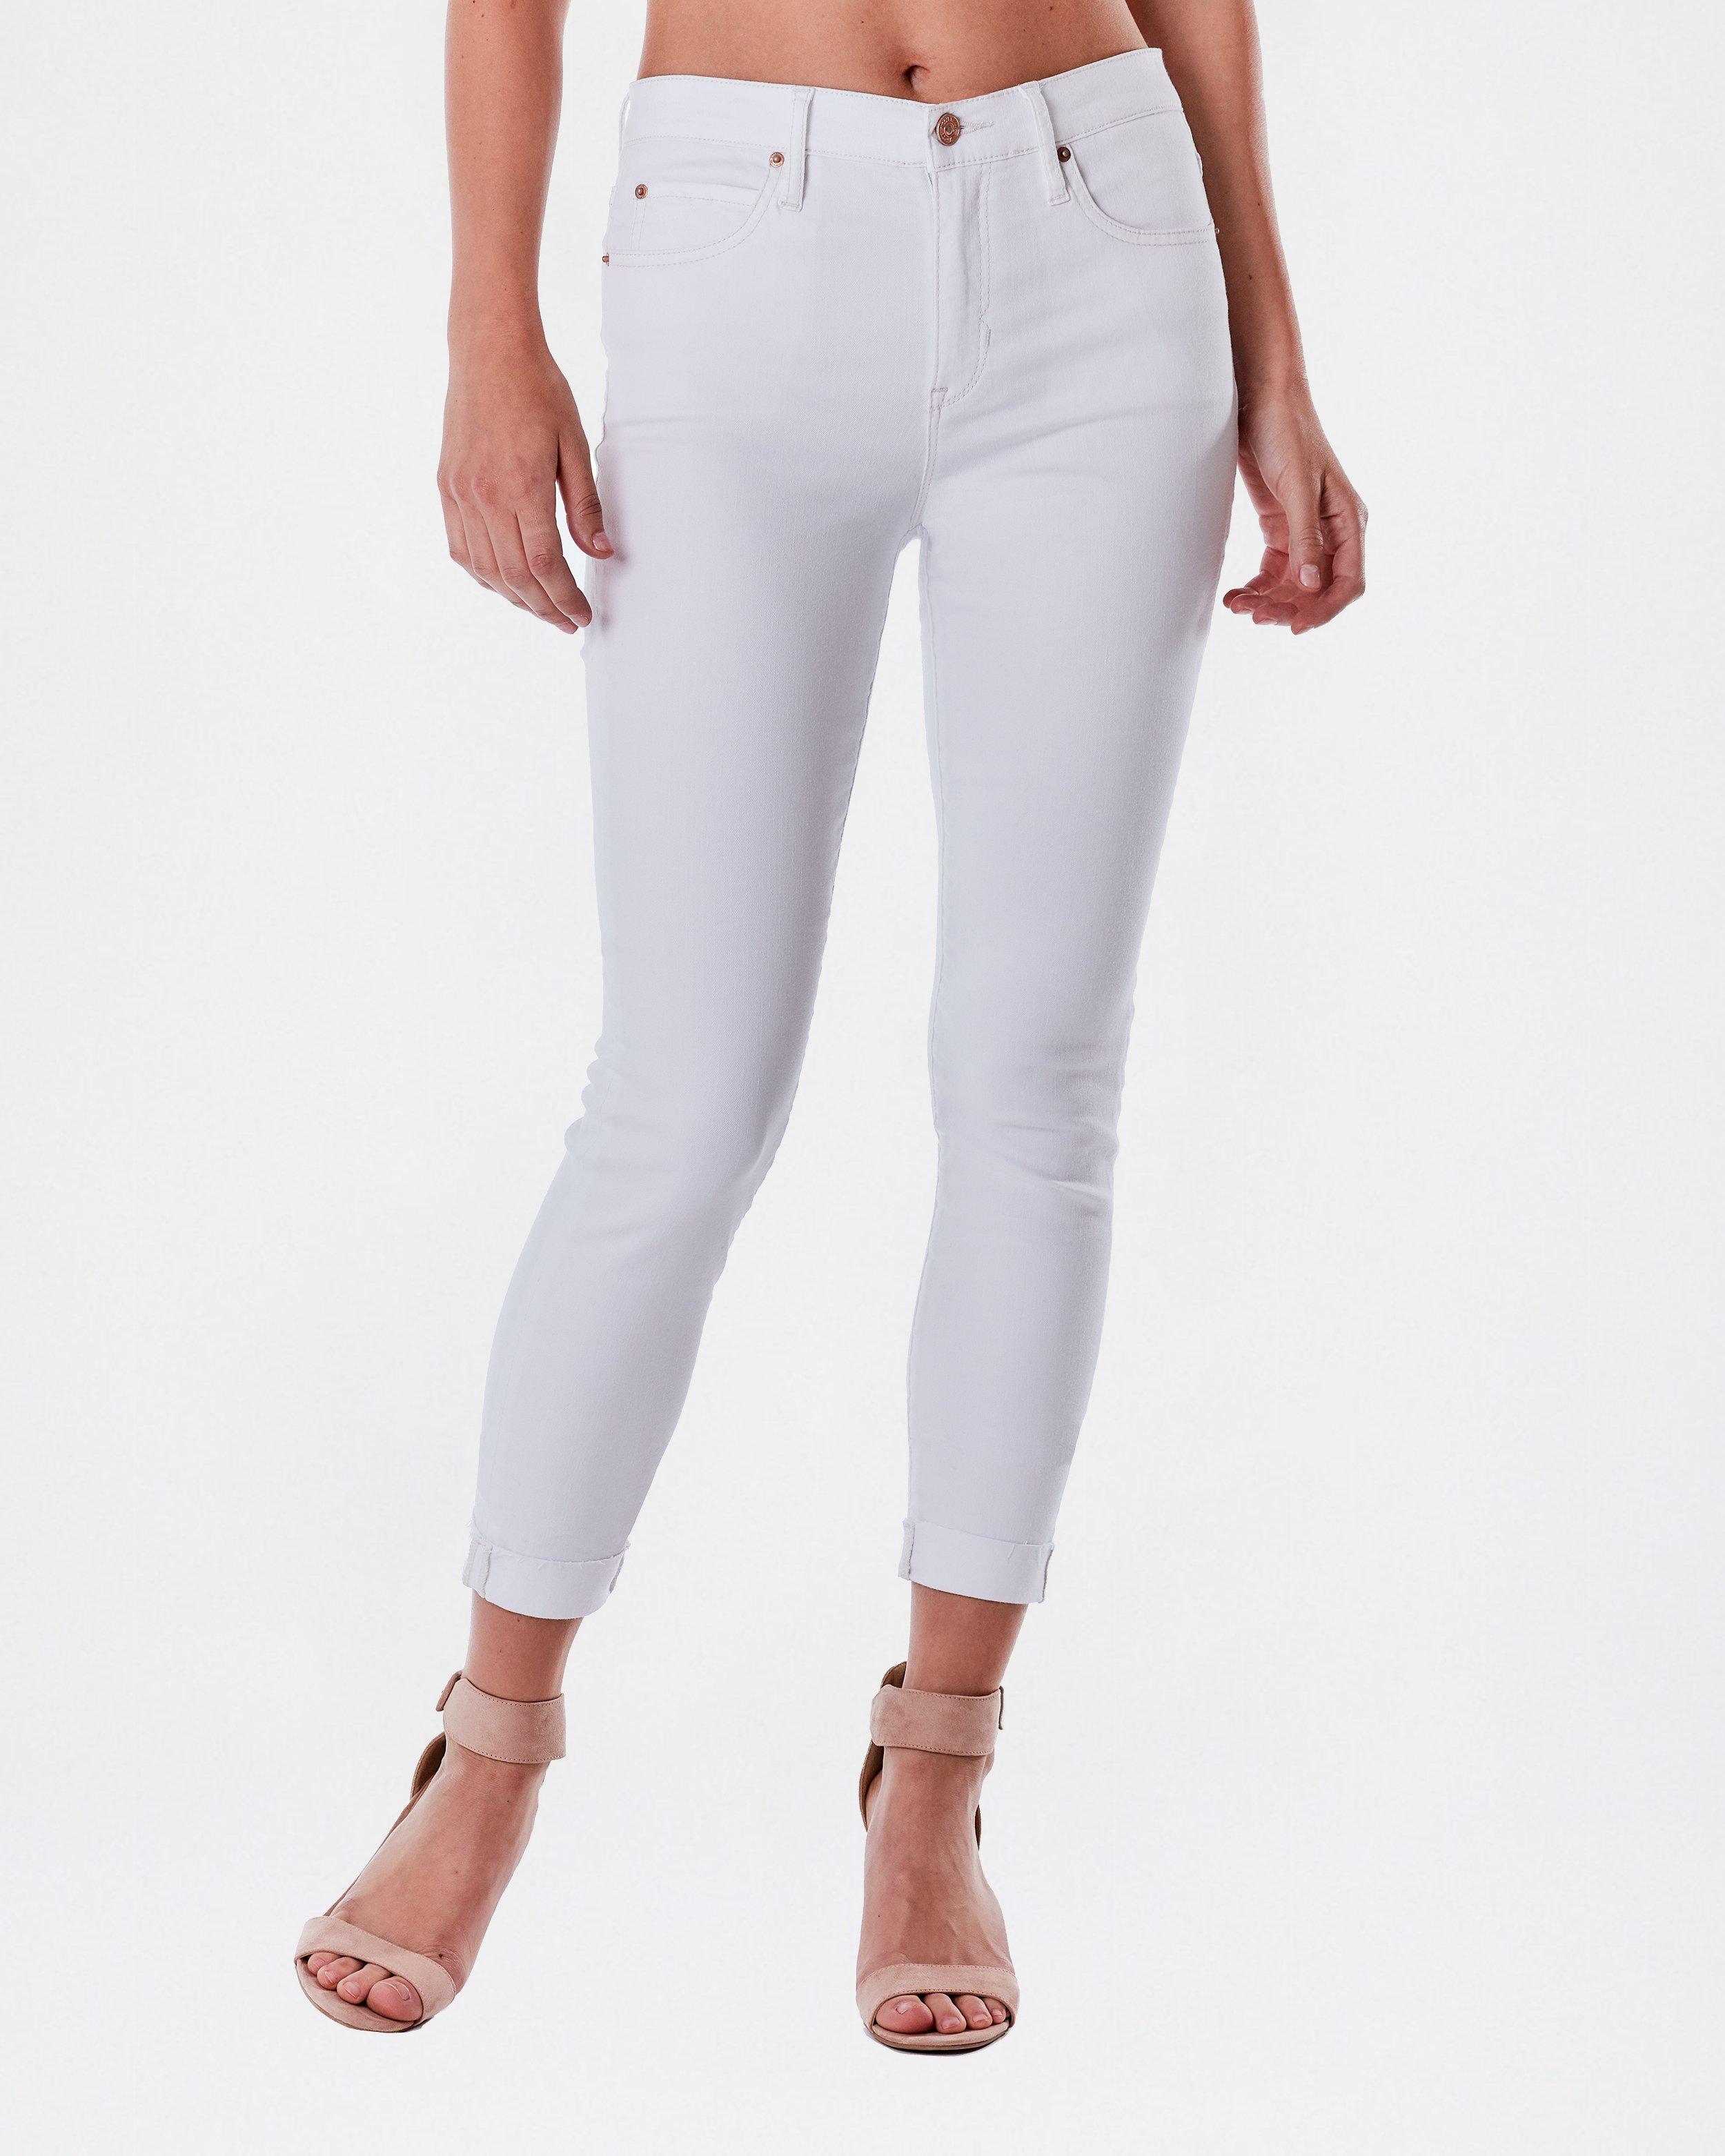 Nicole Miller Cotton Soho High Rise Crop Skinny Jean in White - Lyst